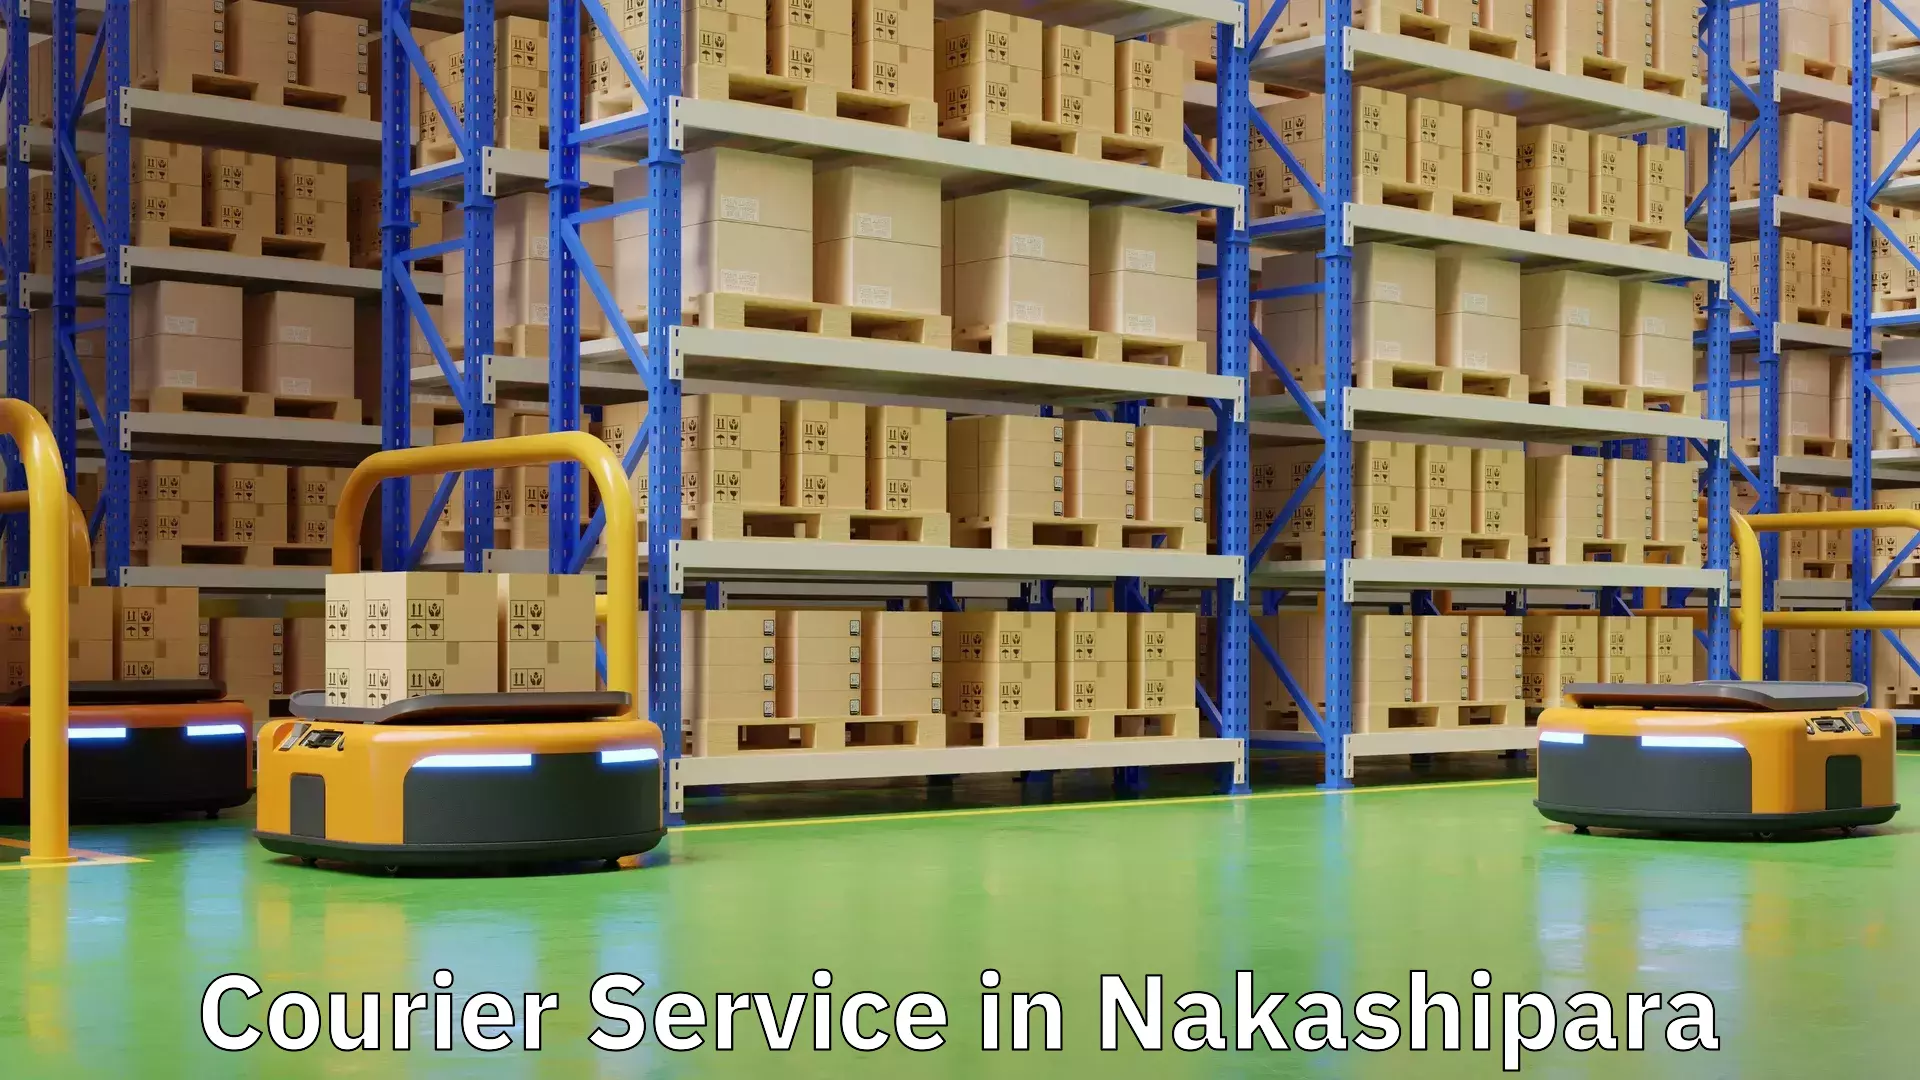 Dynamic courier operations in Nakashipara